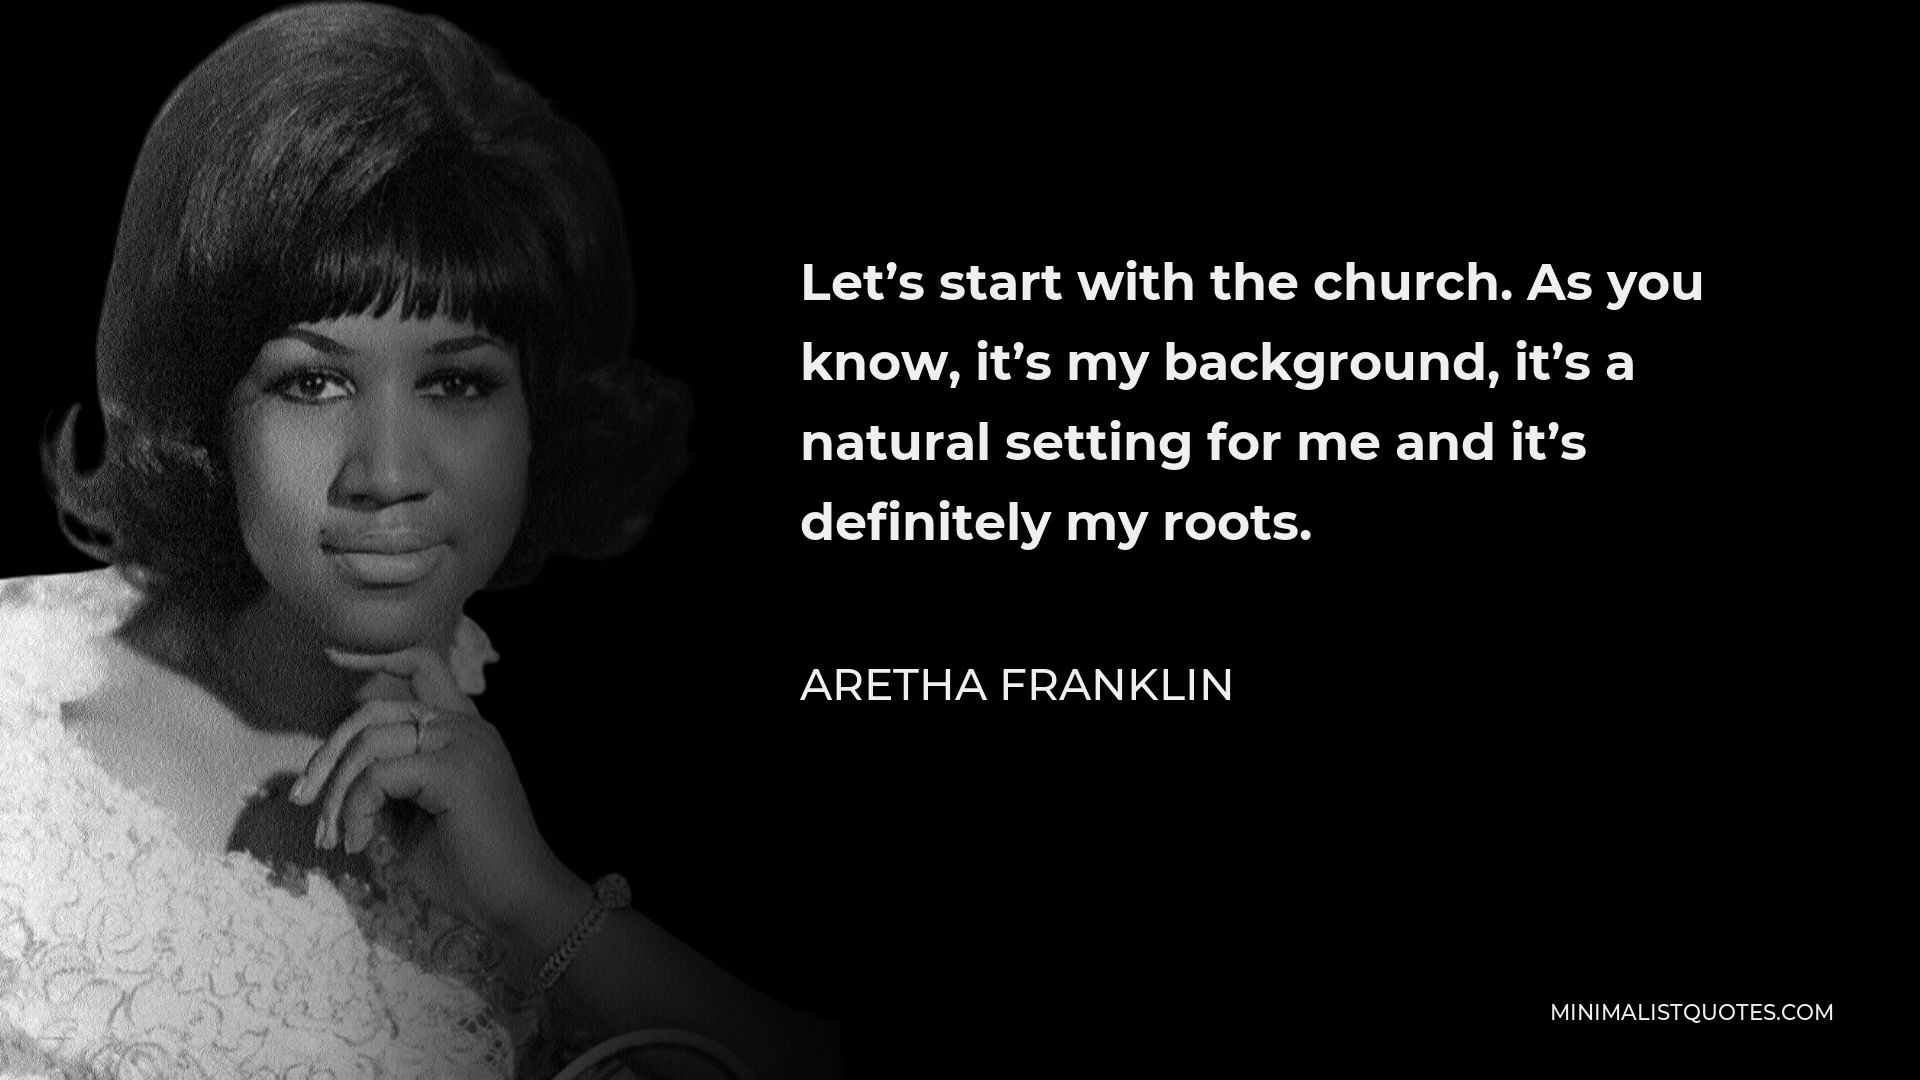 Aretha Franklin Quote - Let’s start with the church. As you know, it’s my background, it’s a natural setting for me and it’s definitely my roots.